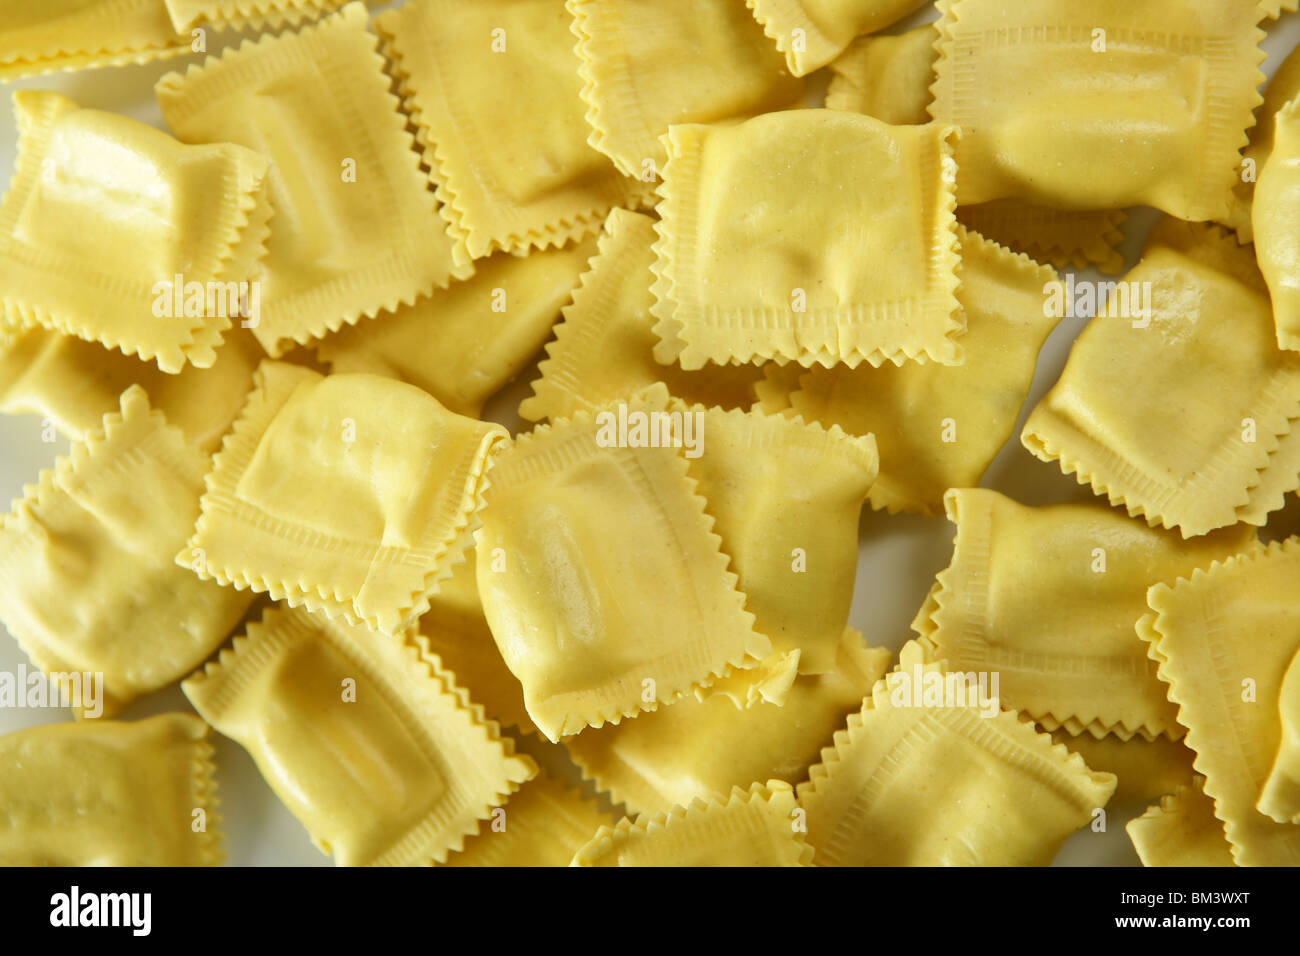 Download Cheese Filled Italian Yellow Pasta Texture White Background Stock Photo Alamy Yellowimages Mockups